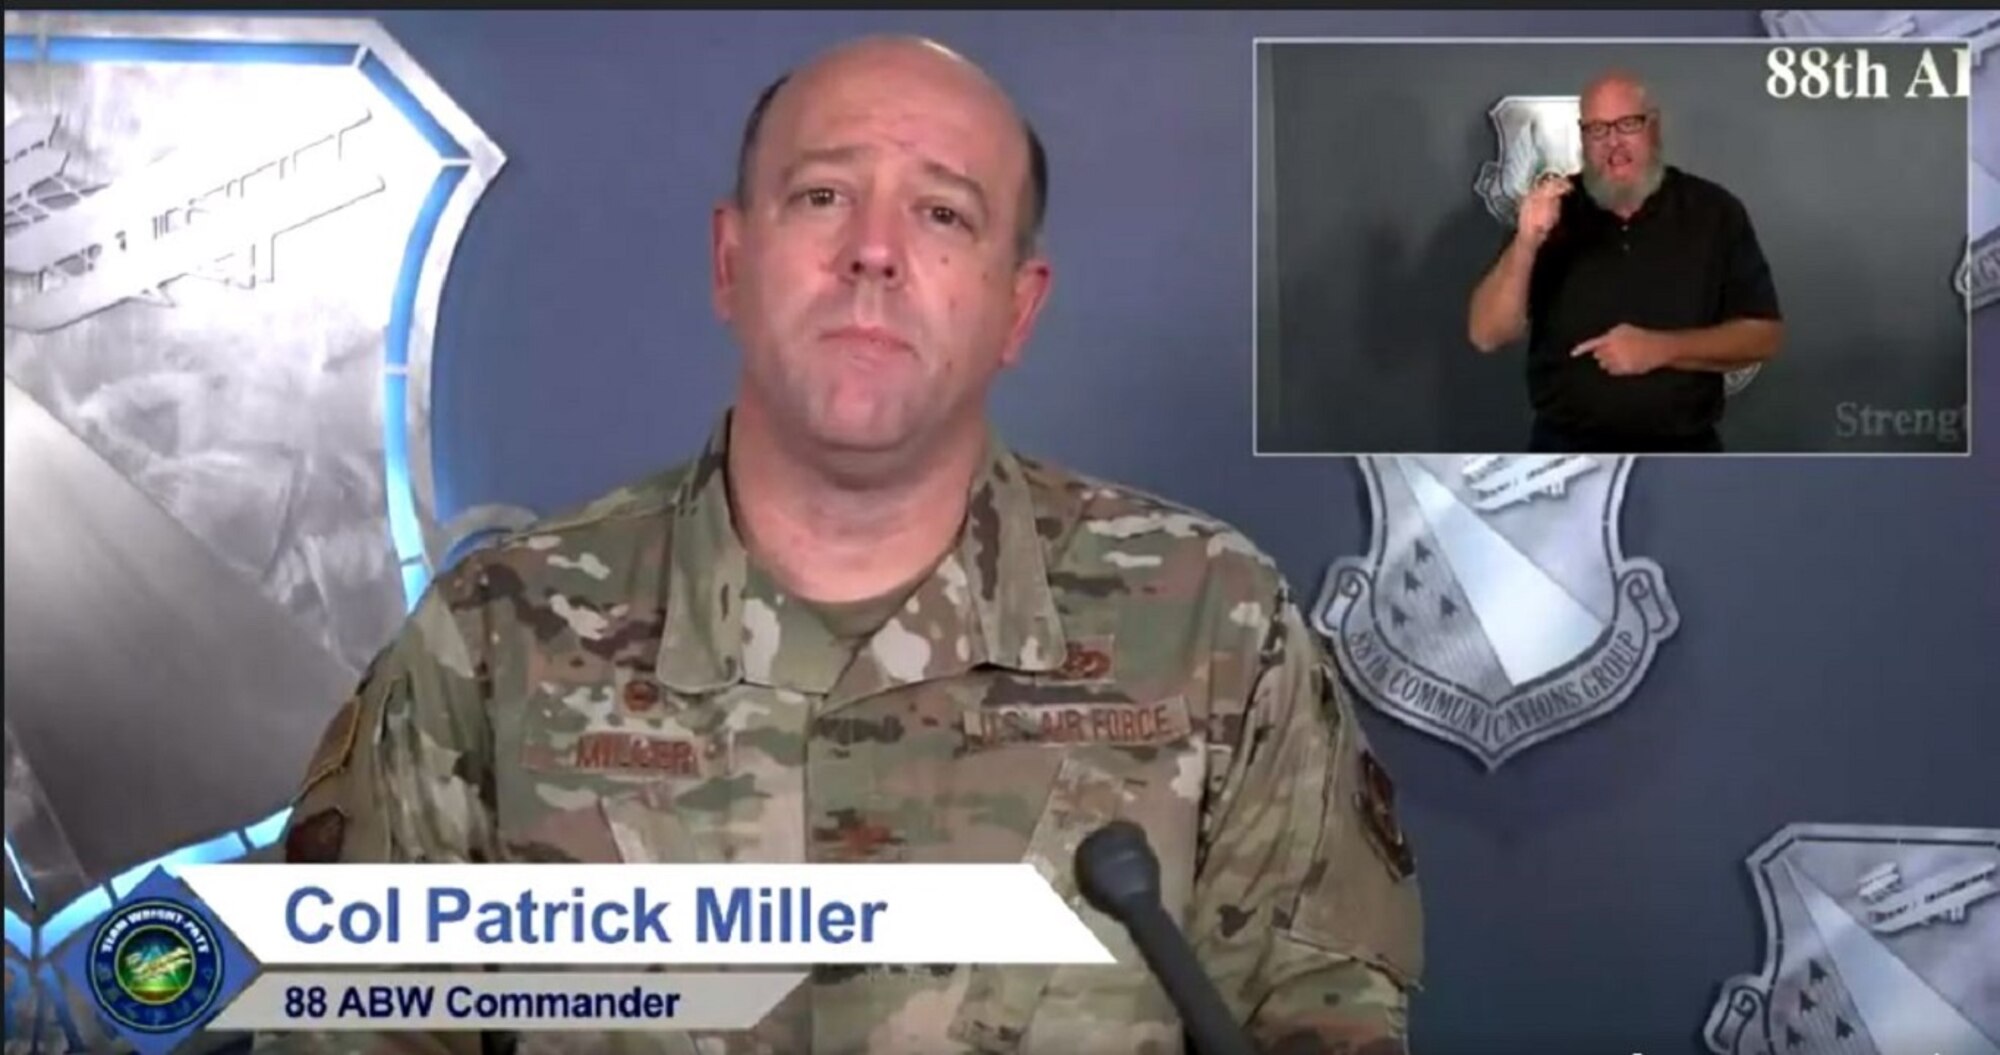 Col. Patrick Miller, Wright-Patterson Air Force Base installation and 88th Air Wing Base commander, held a Facebook Live town hall Nov. 16to address COVID-19 concerns and rising cases in the region.